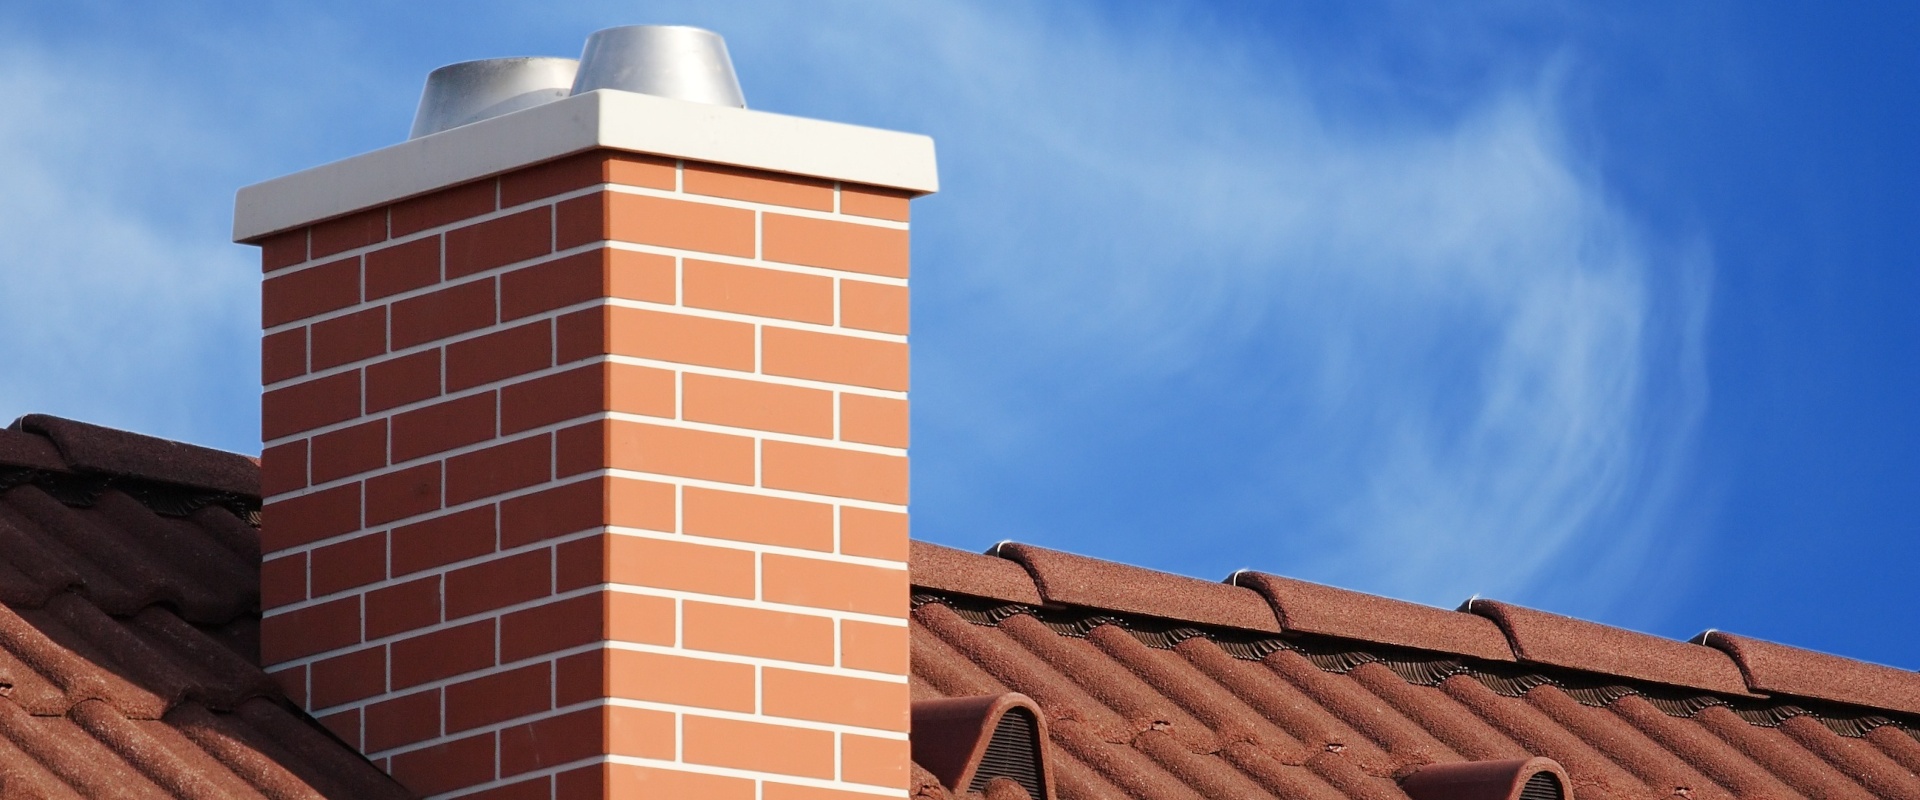 Chimney Sweep & Repair Services, Dryer Vent Cleaning